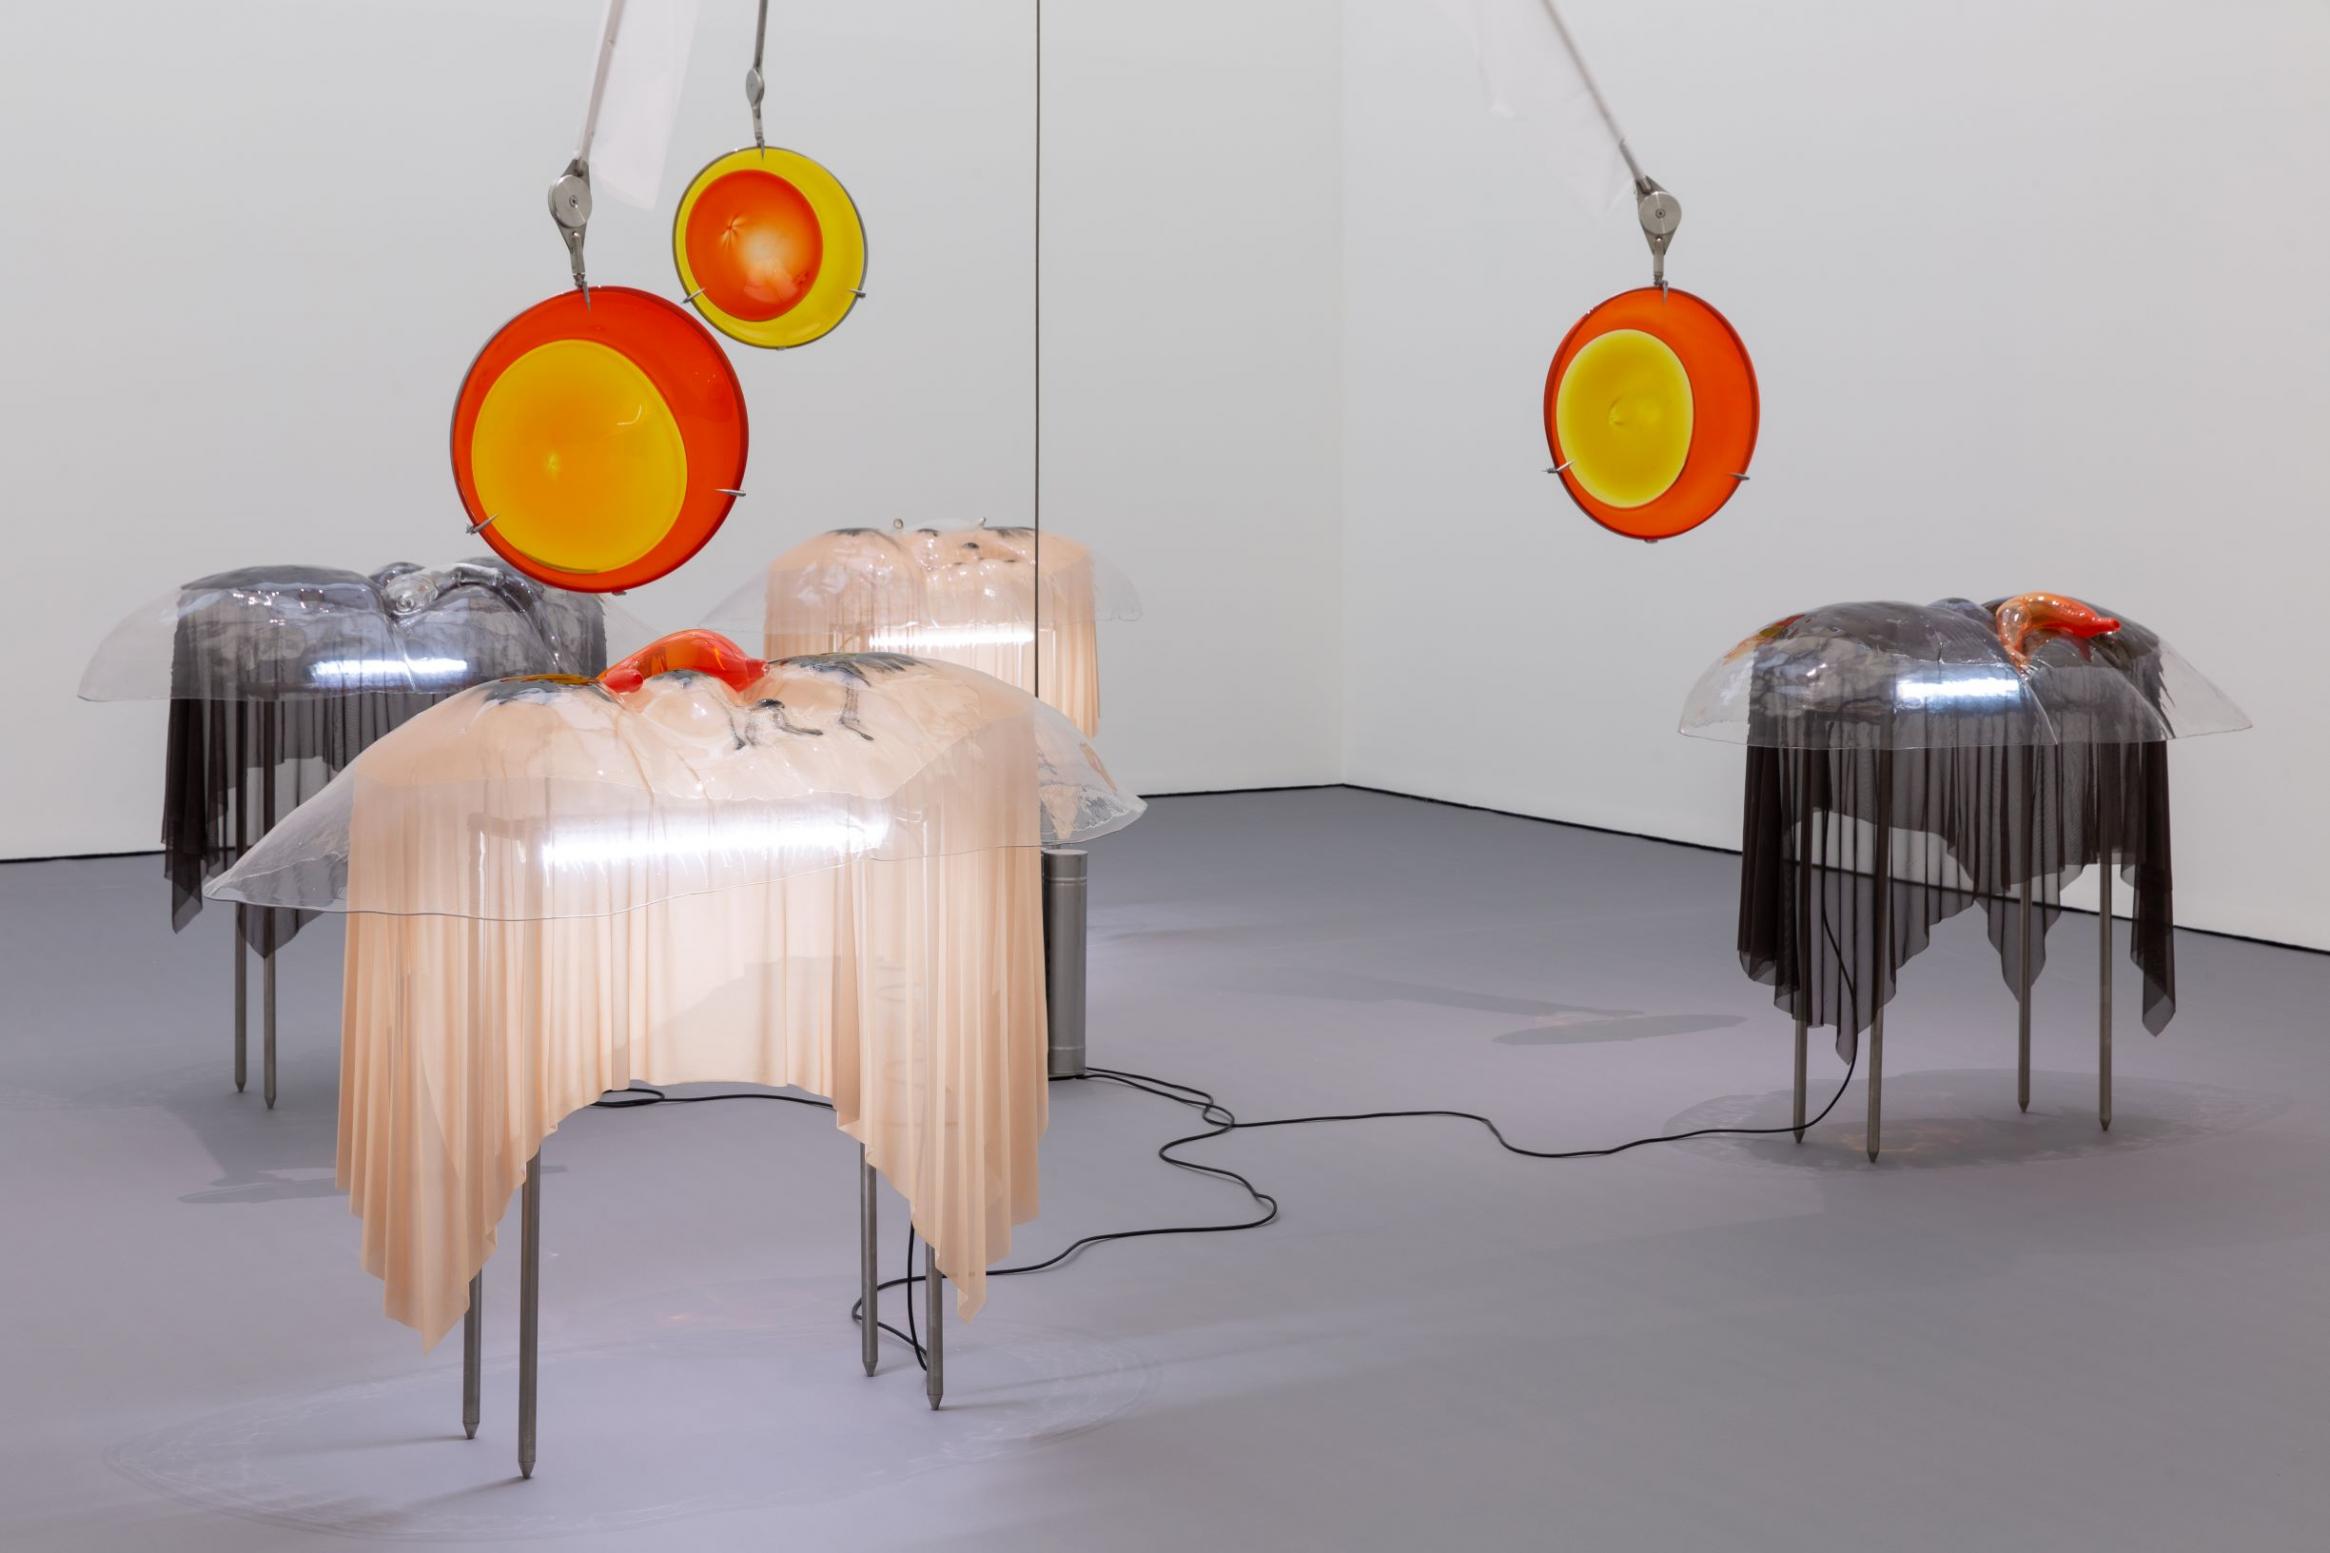 An installation photograph of abstract sculptures in a sparse gallery. Tables seem to be covered with pink and black latex fabric; circular orange and yellow orbs hang from the ceiling. Black cord is laid between the tables.